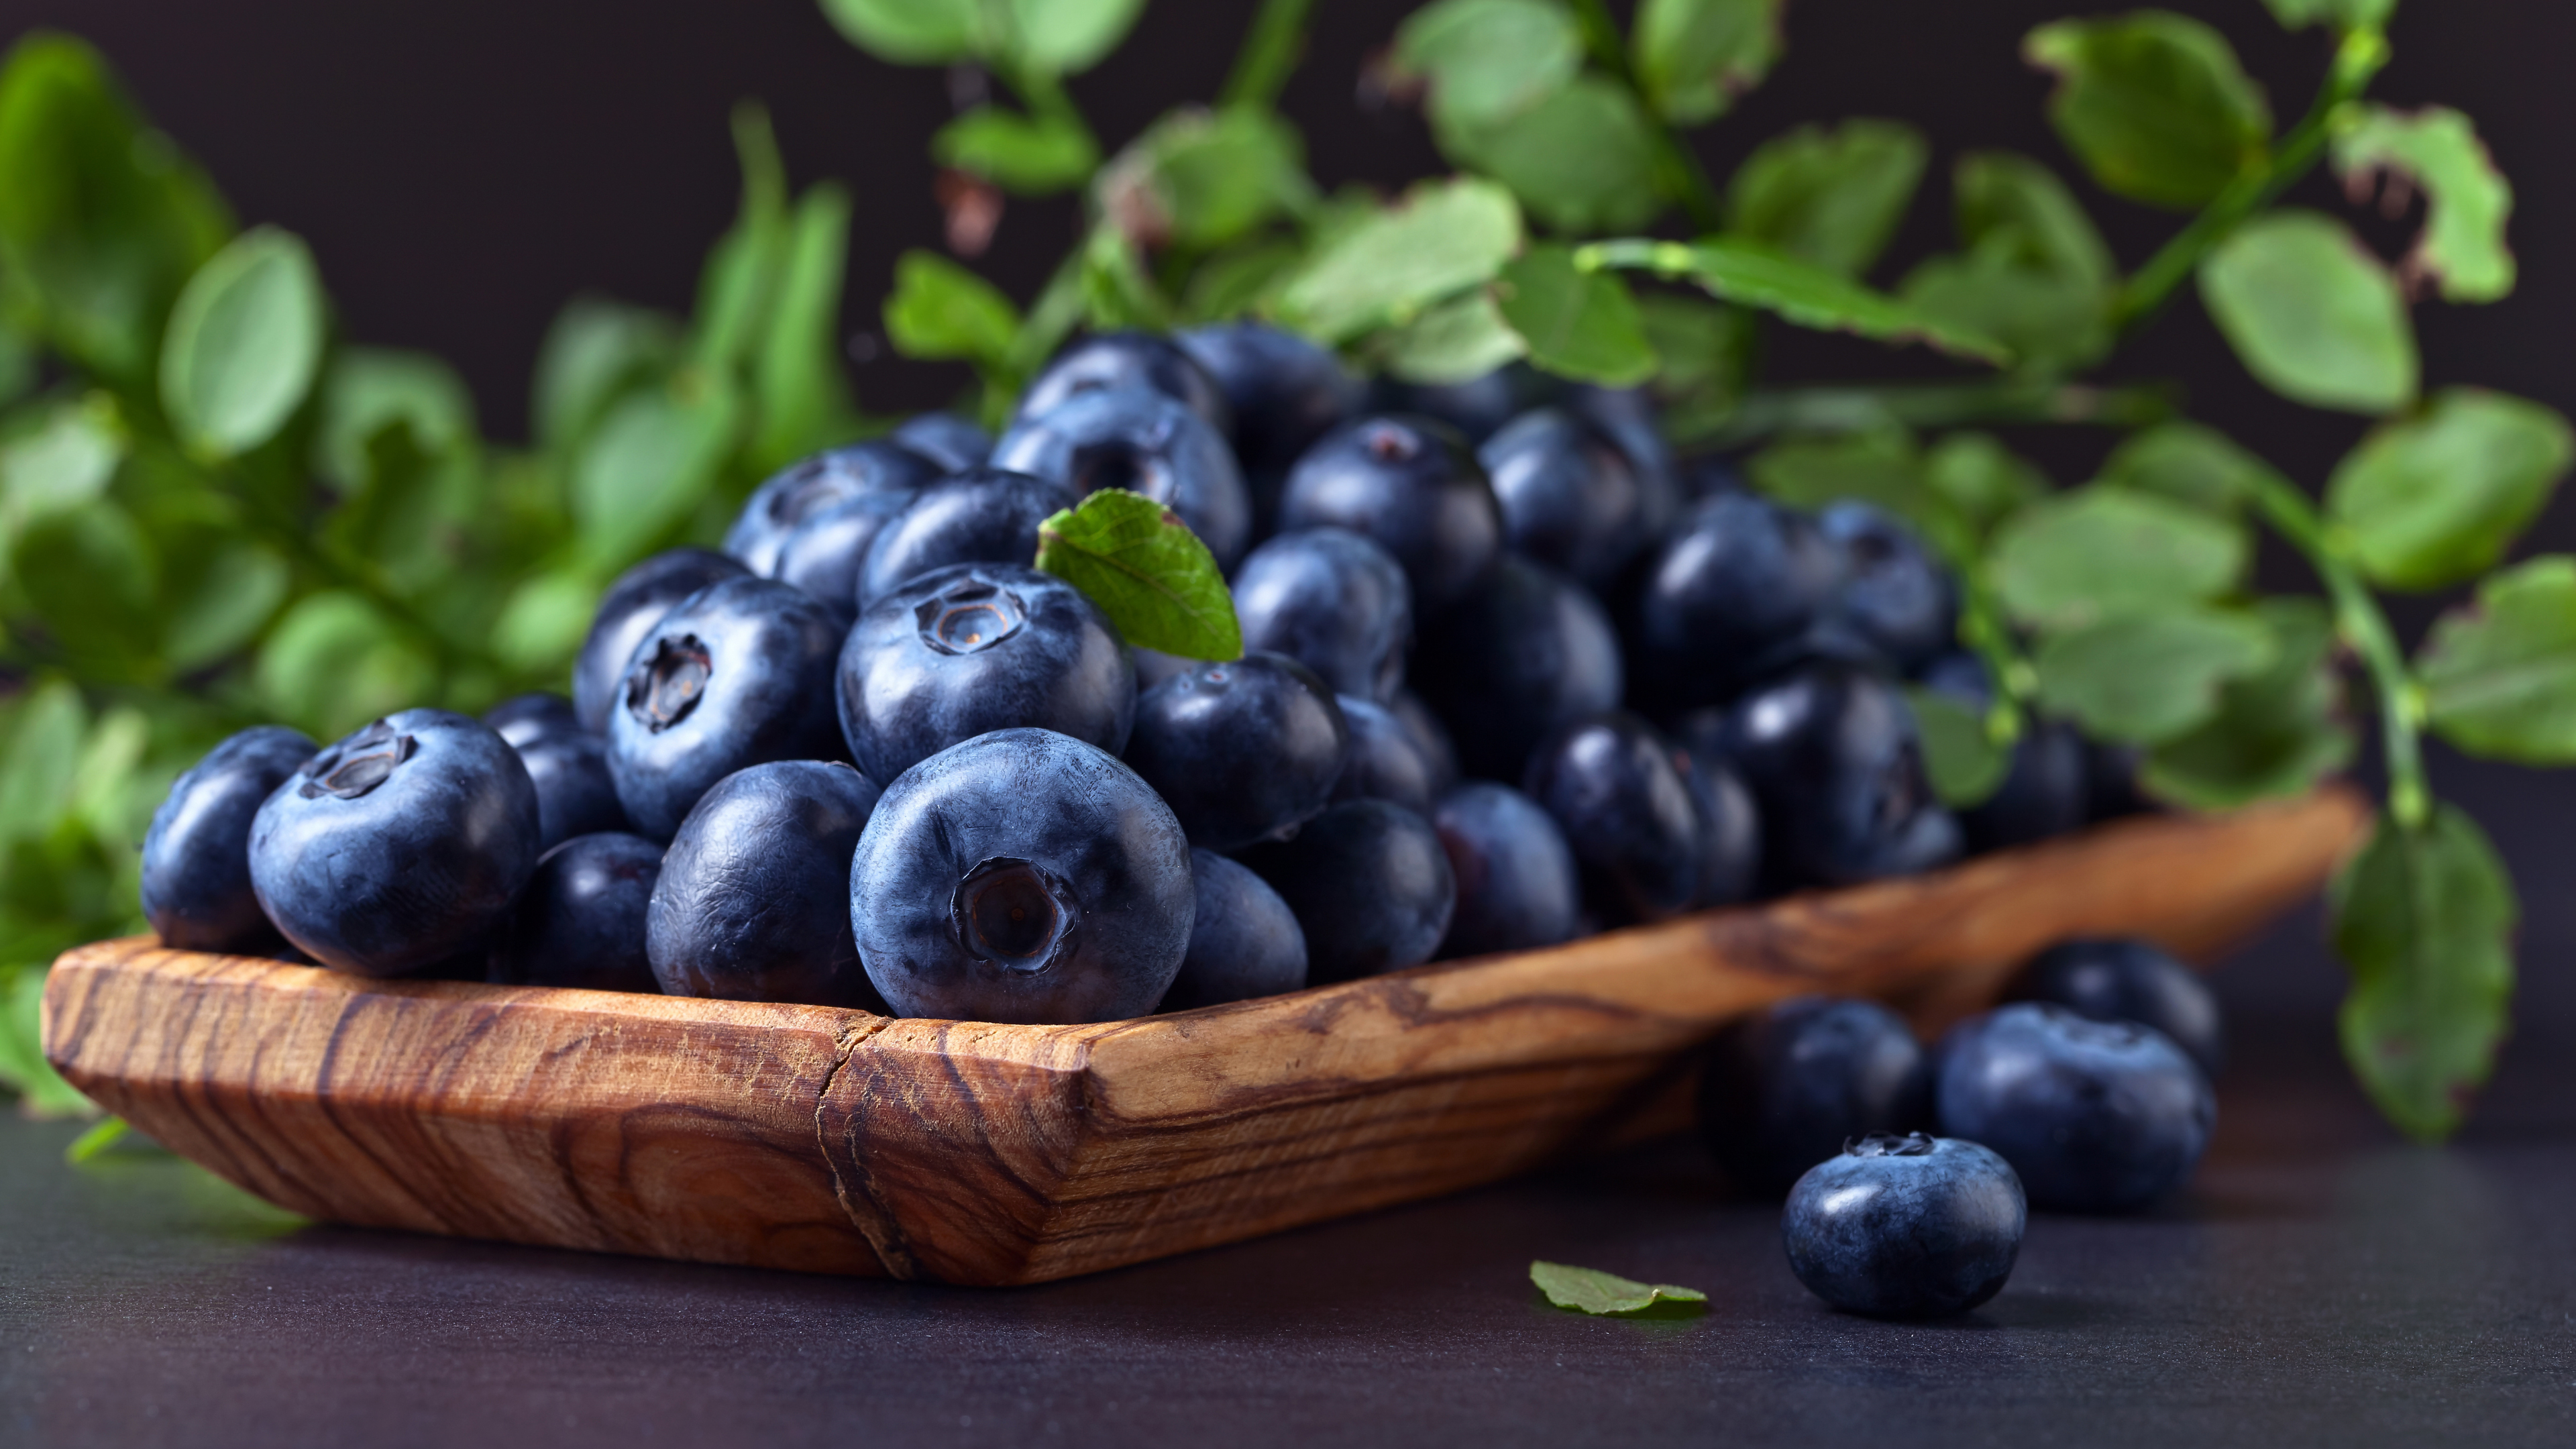 Download 3840x2160 wallpaper kitchen, leaves, blueberries, fruits, 4k, uhd 16: widescreen, 3840x2160 HD image, background, 305